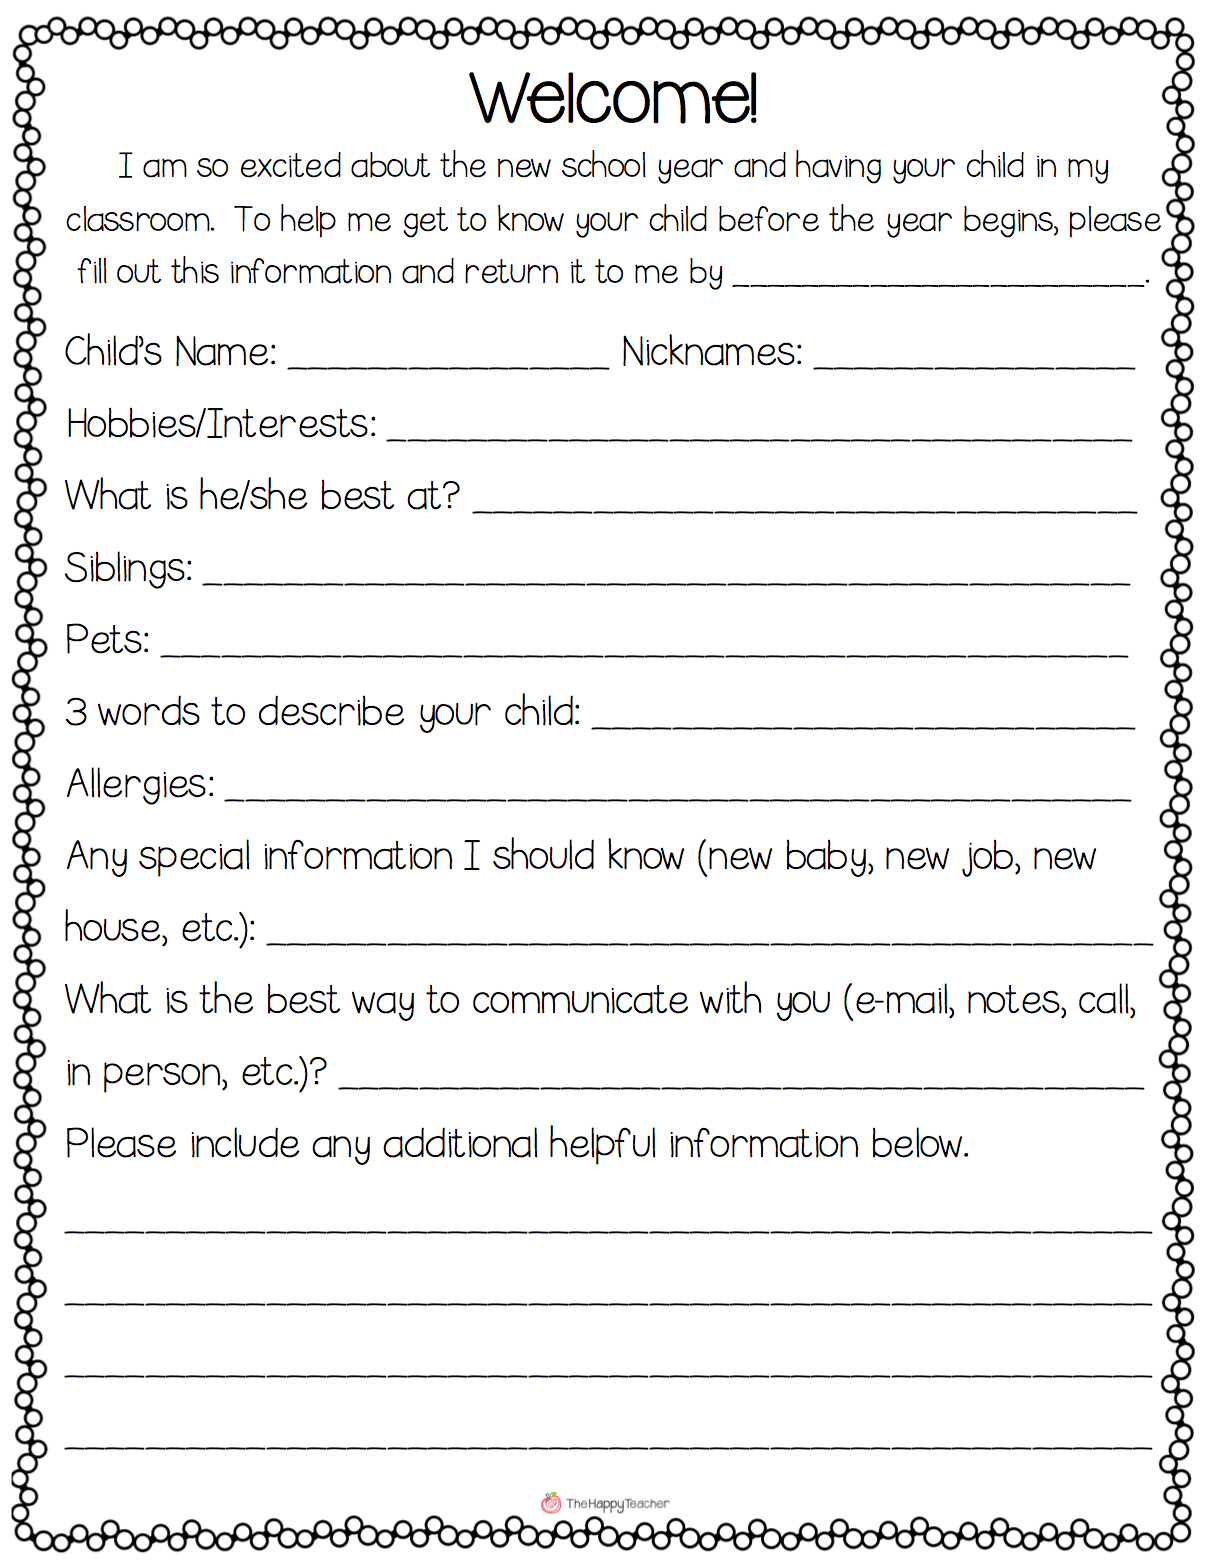 behavior-letter-to-parents-from-teacher-template-collection-letter